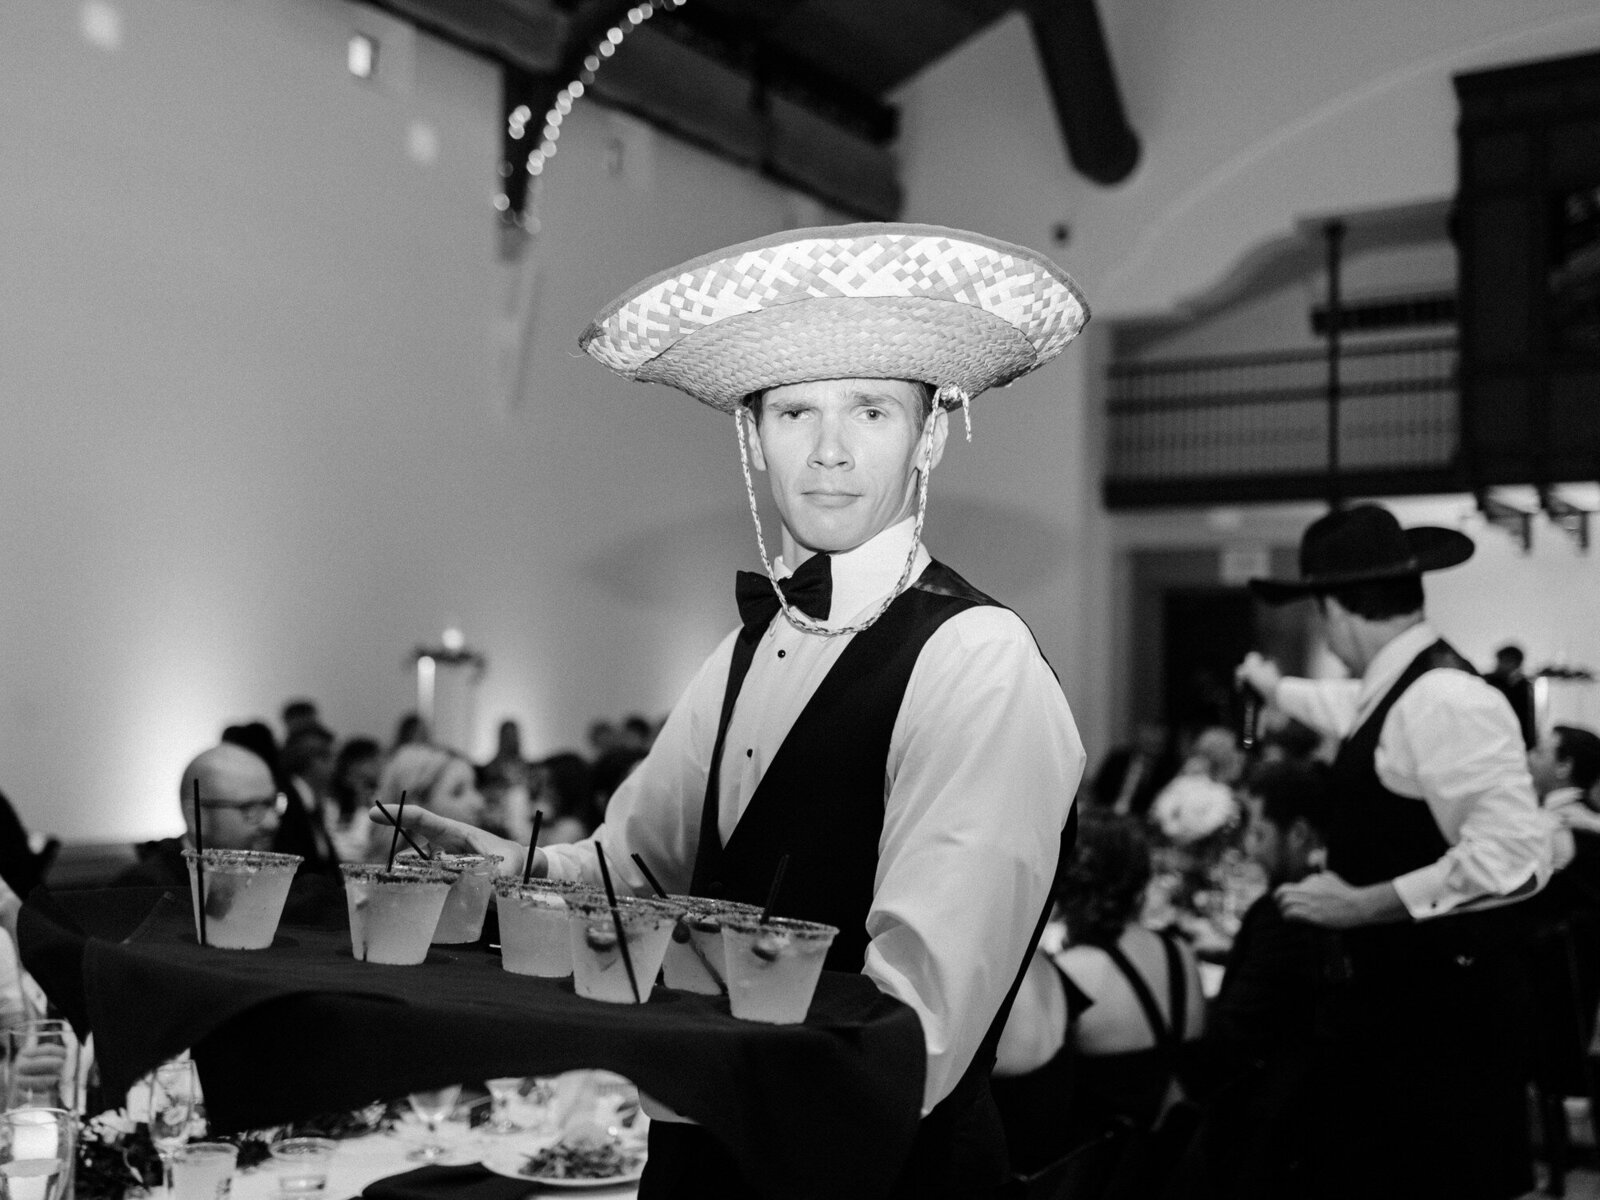 One of the groomsmen walks through the reception hall carrying a tray of drinks, wearing a sombrero. He is looking straight into the camera.